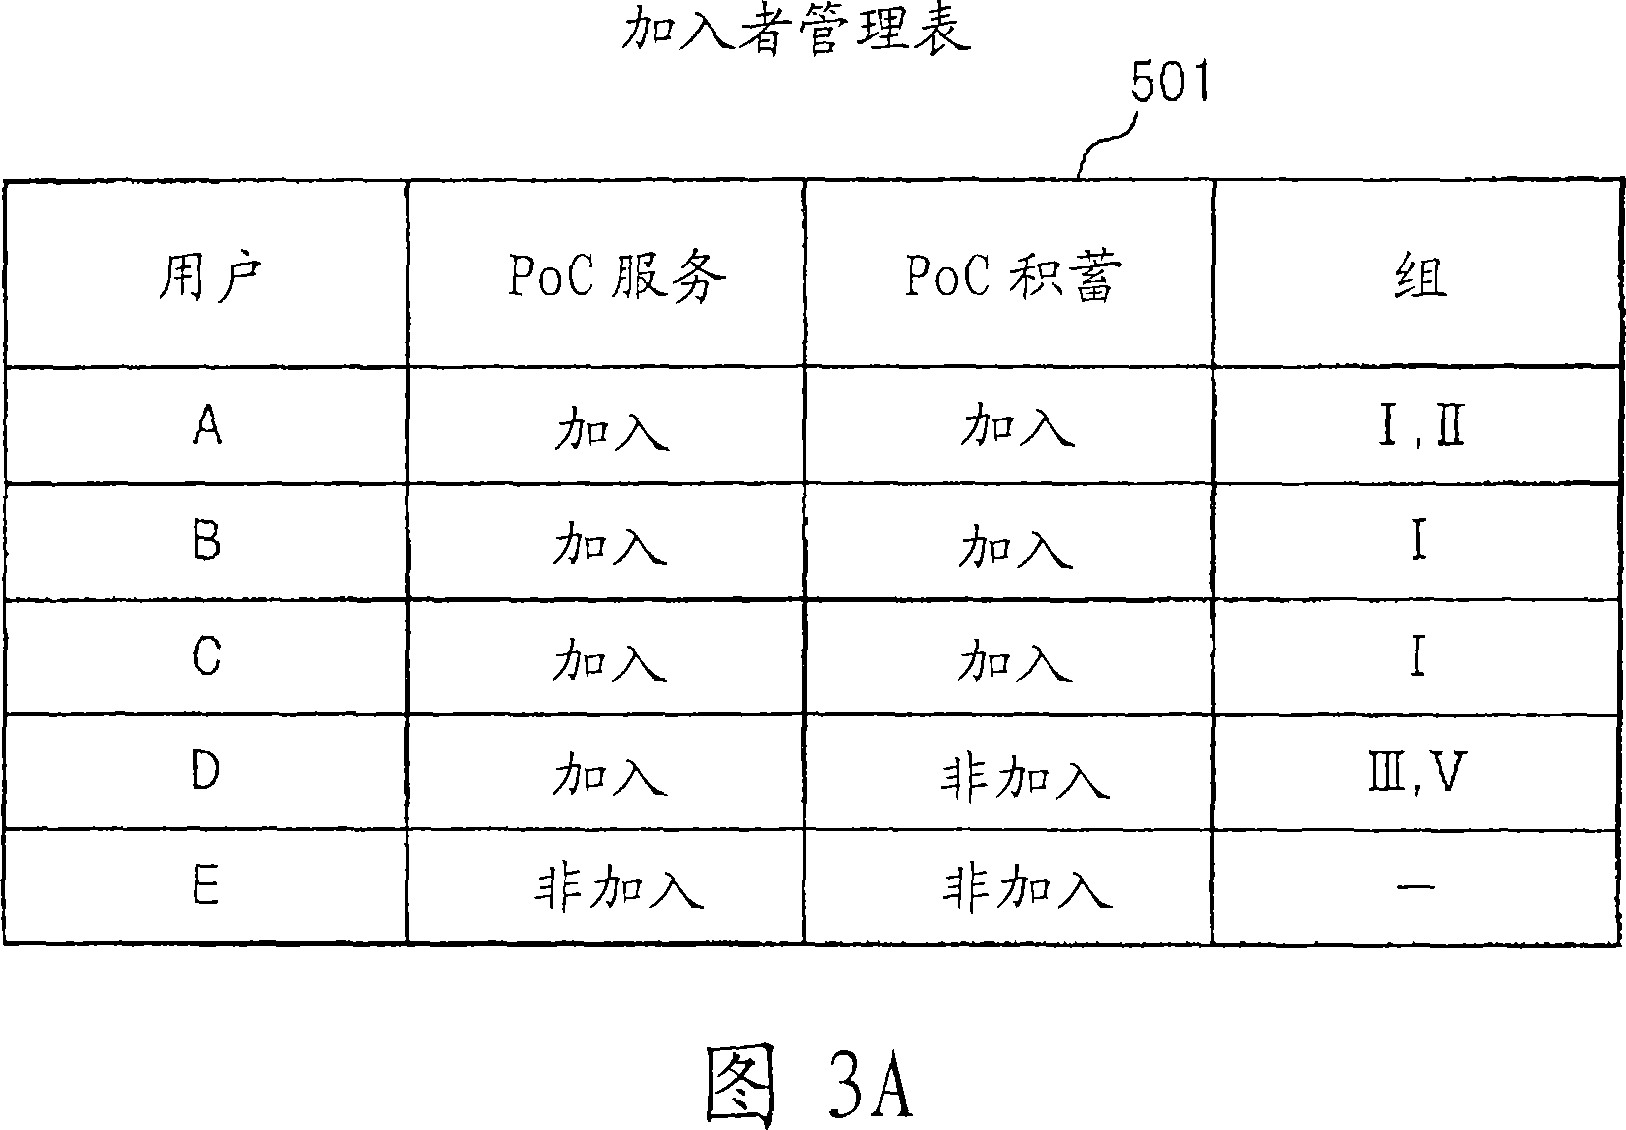 Content server and content service system